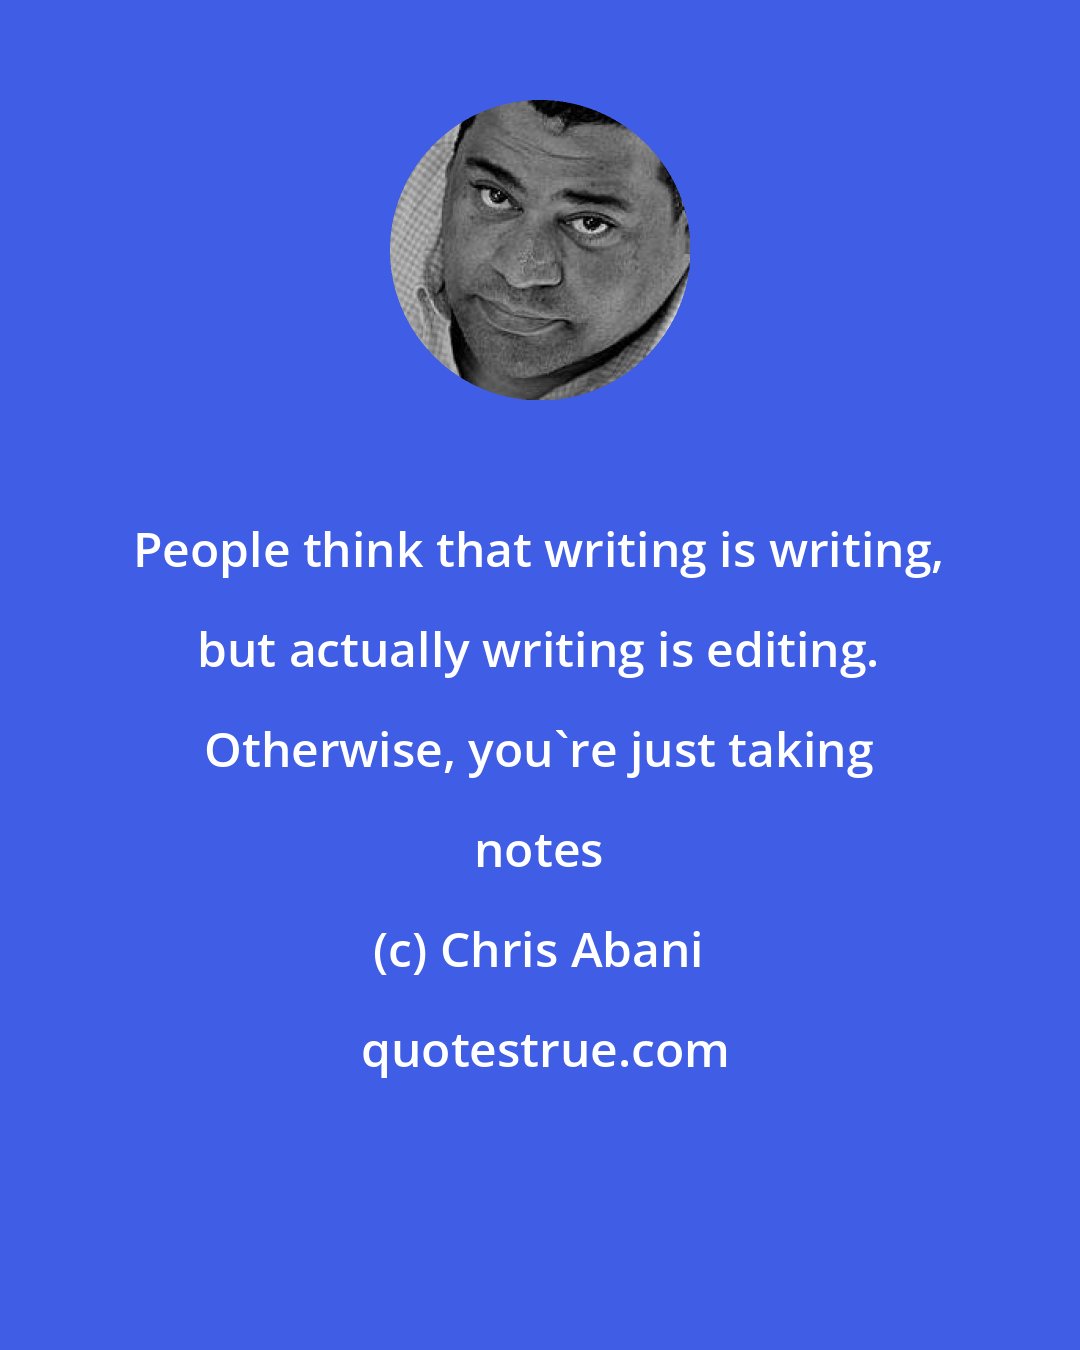 Chris Abani: People think that writing is writing, but actually writing is editing. Otherwise, you're just taking notes